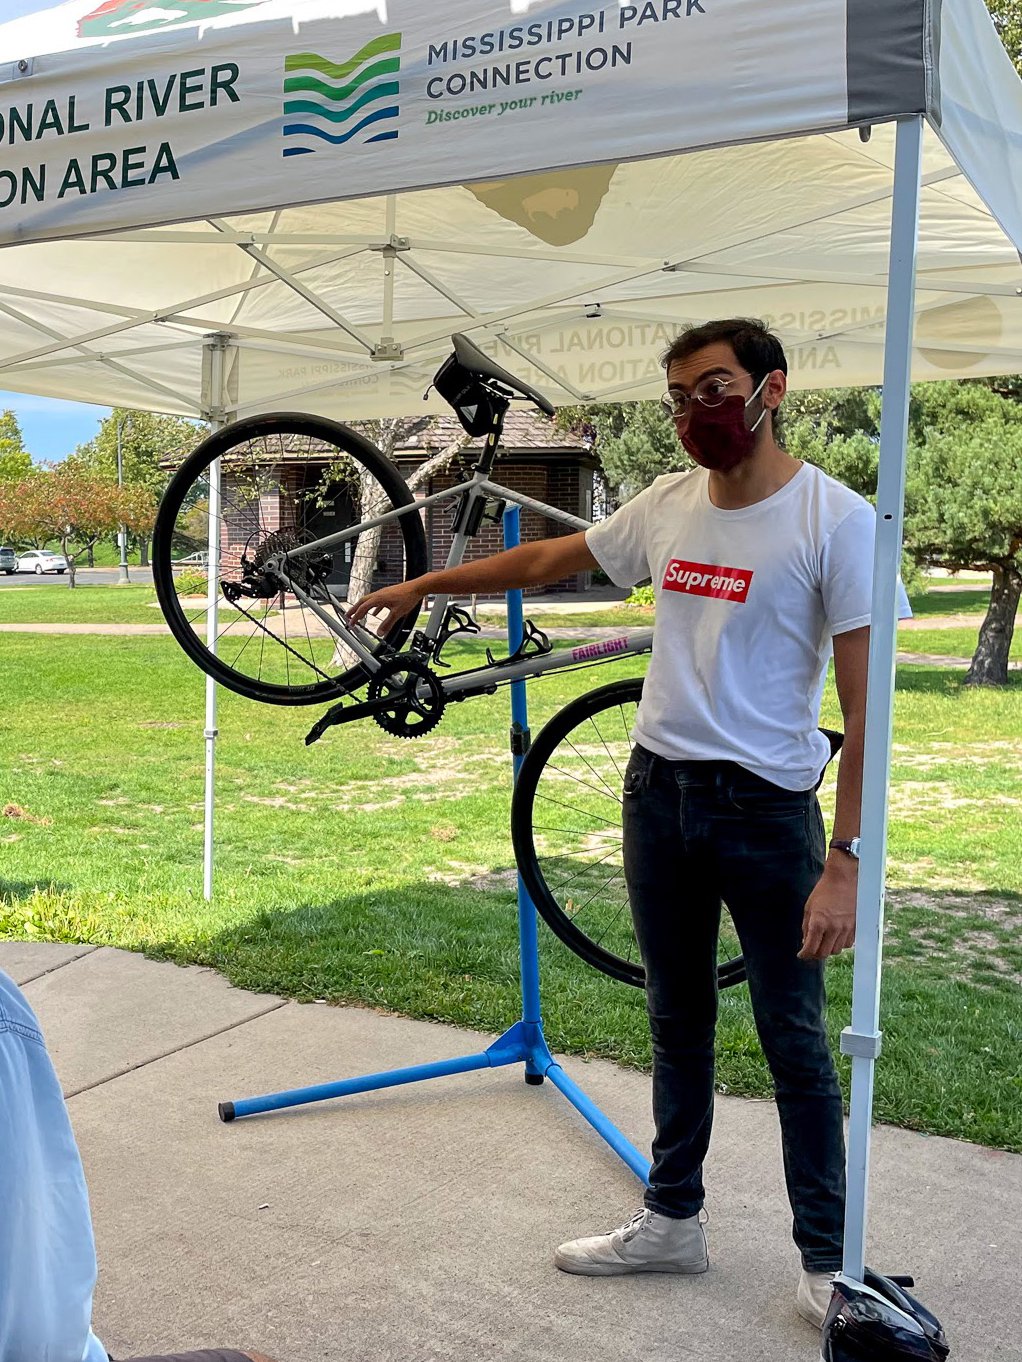  Pallav Kumar  A person demonstrates in front of a bike propped up in a bike stand. They are standing under a white canopy tent outdoors. 